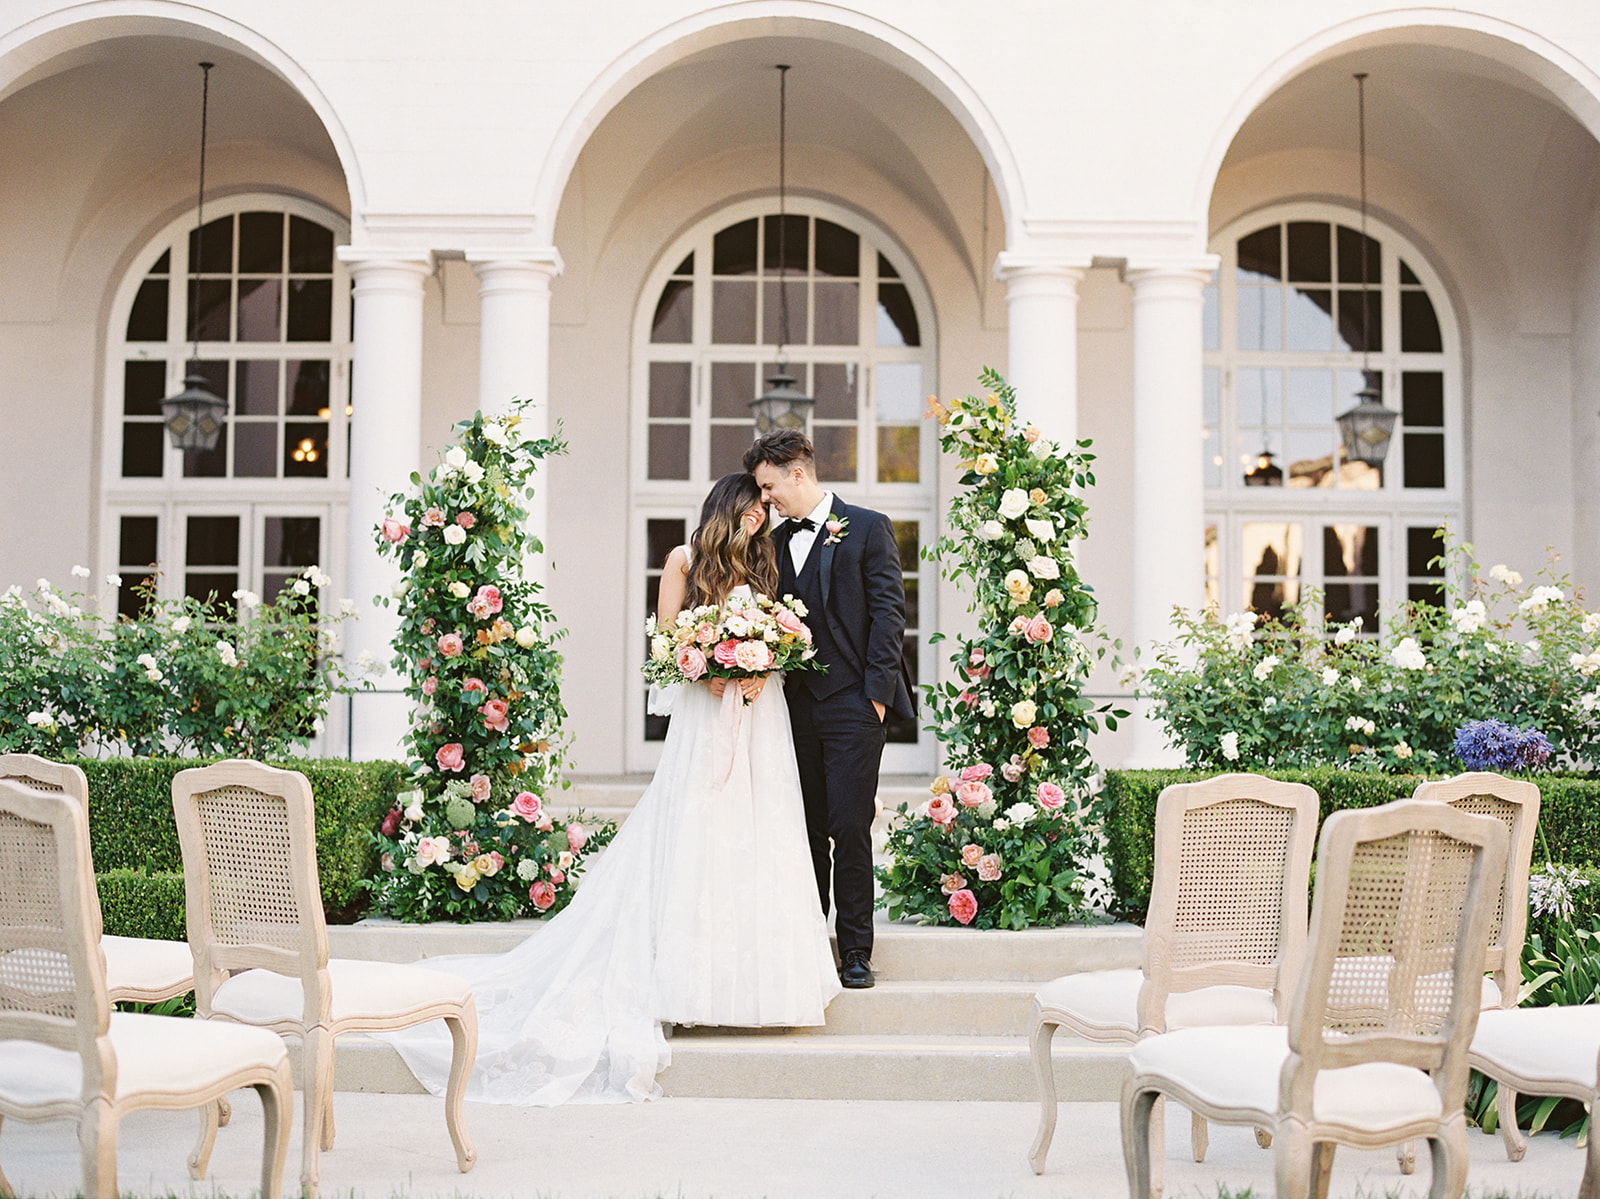 Planning the Perfect Classic and Elegant Wedding with Tips from Top Wedding Pros